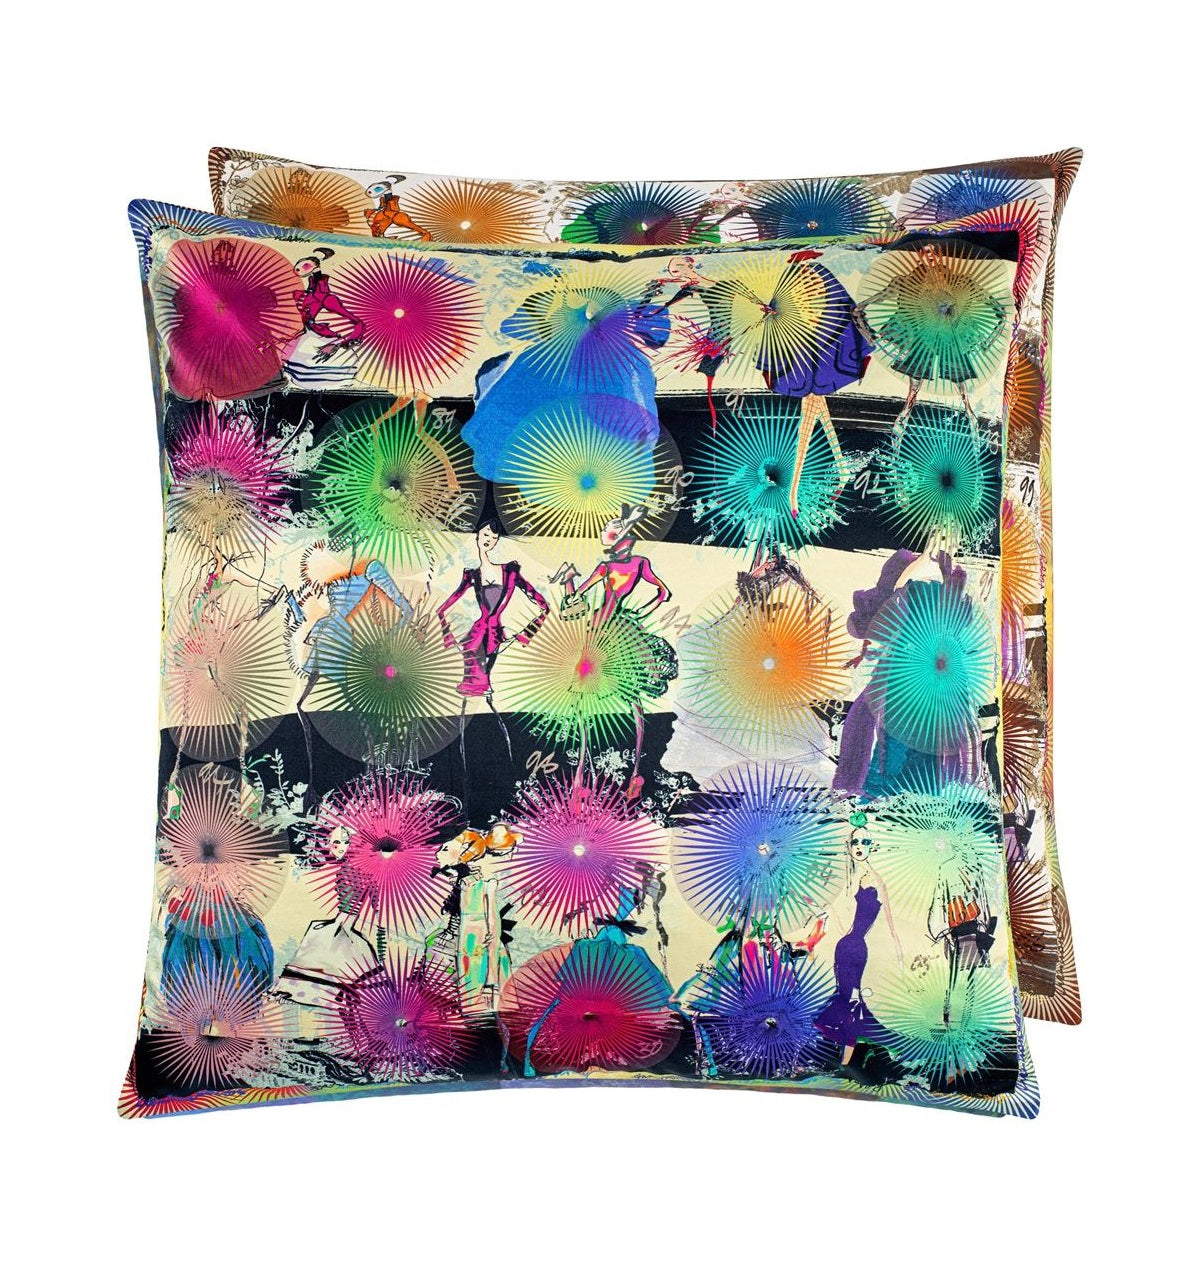 Two-sided pillow LACROIX PHOTOCALL cotton satin - Eye on Design